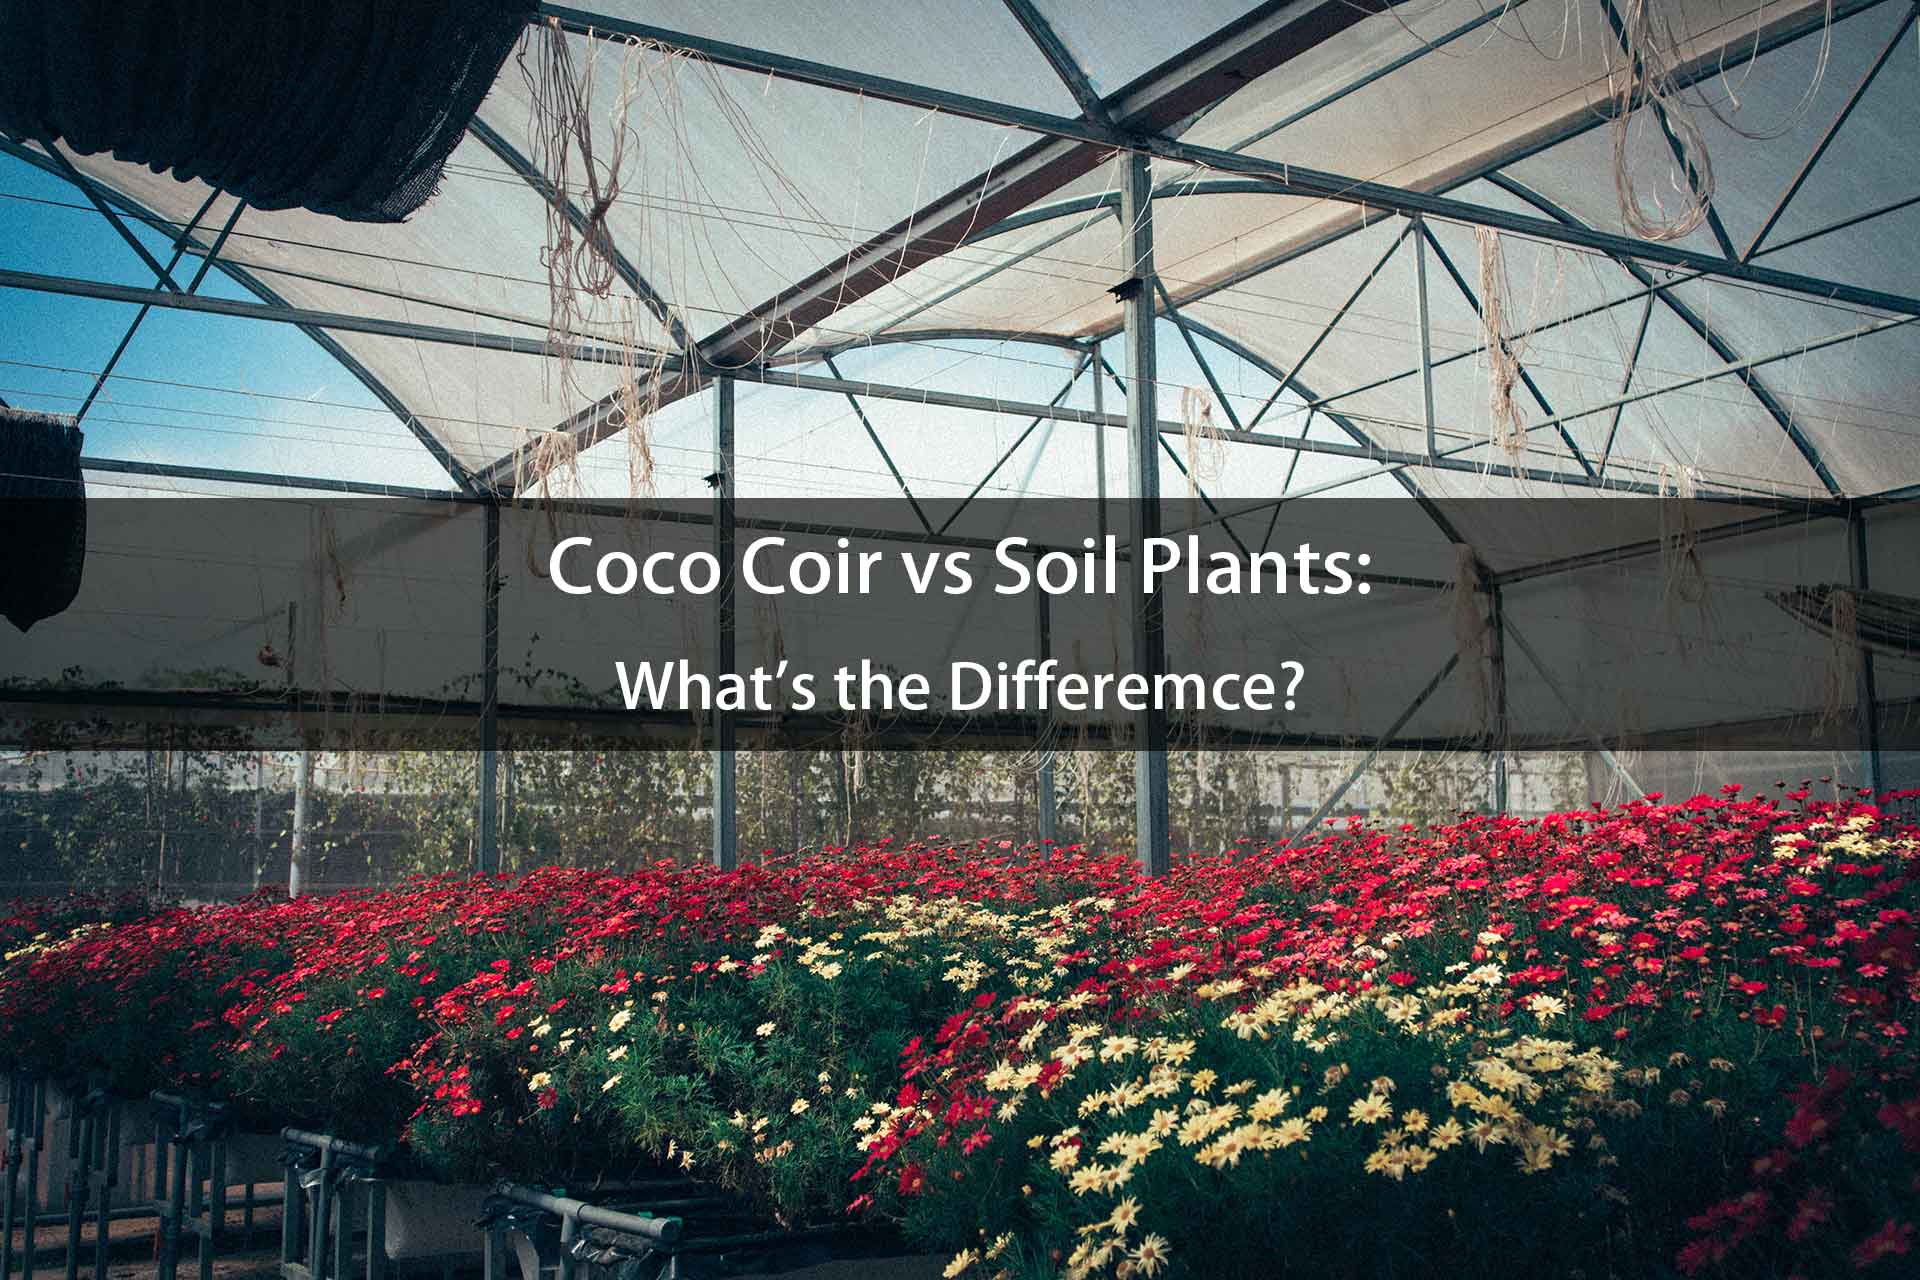 Coco Coir Plants vs. Soil Plants: What's the Difference?